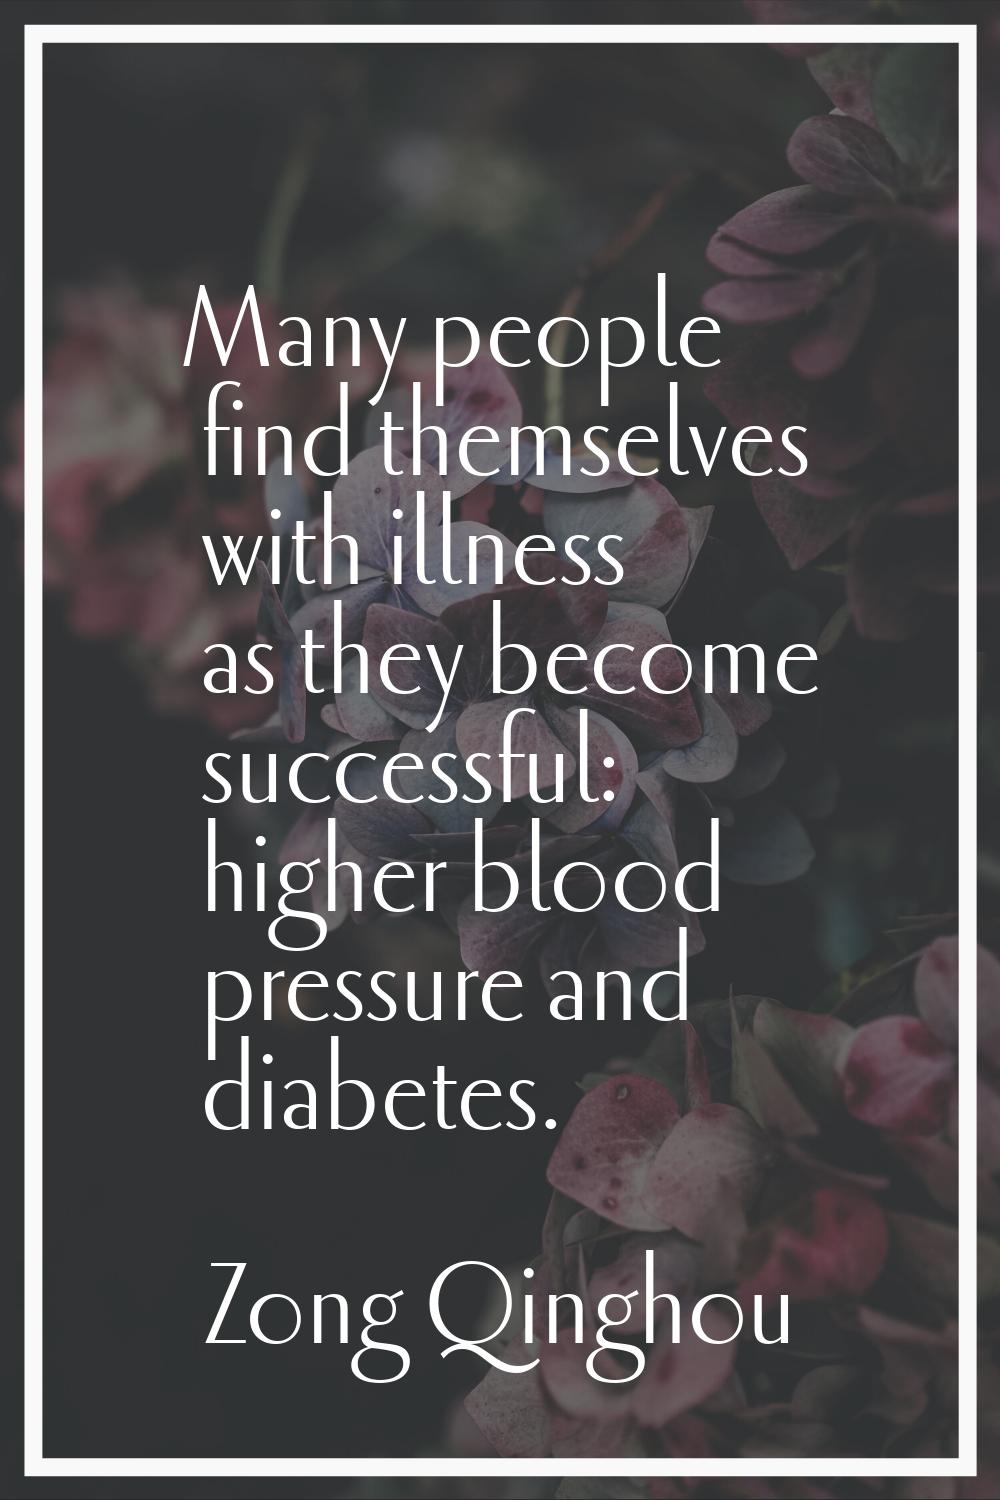 Many people find themselves with illness as they become successful: higher blood pressure and diabe